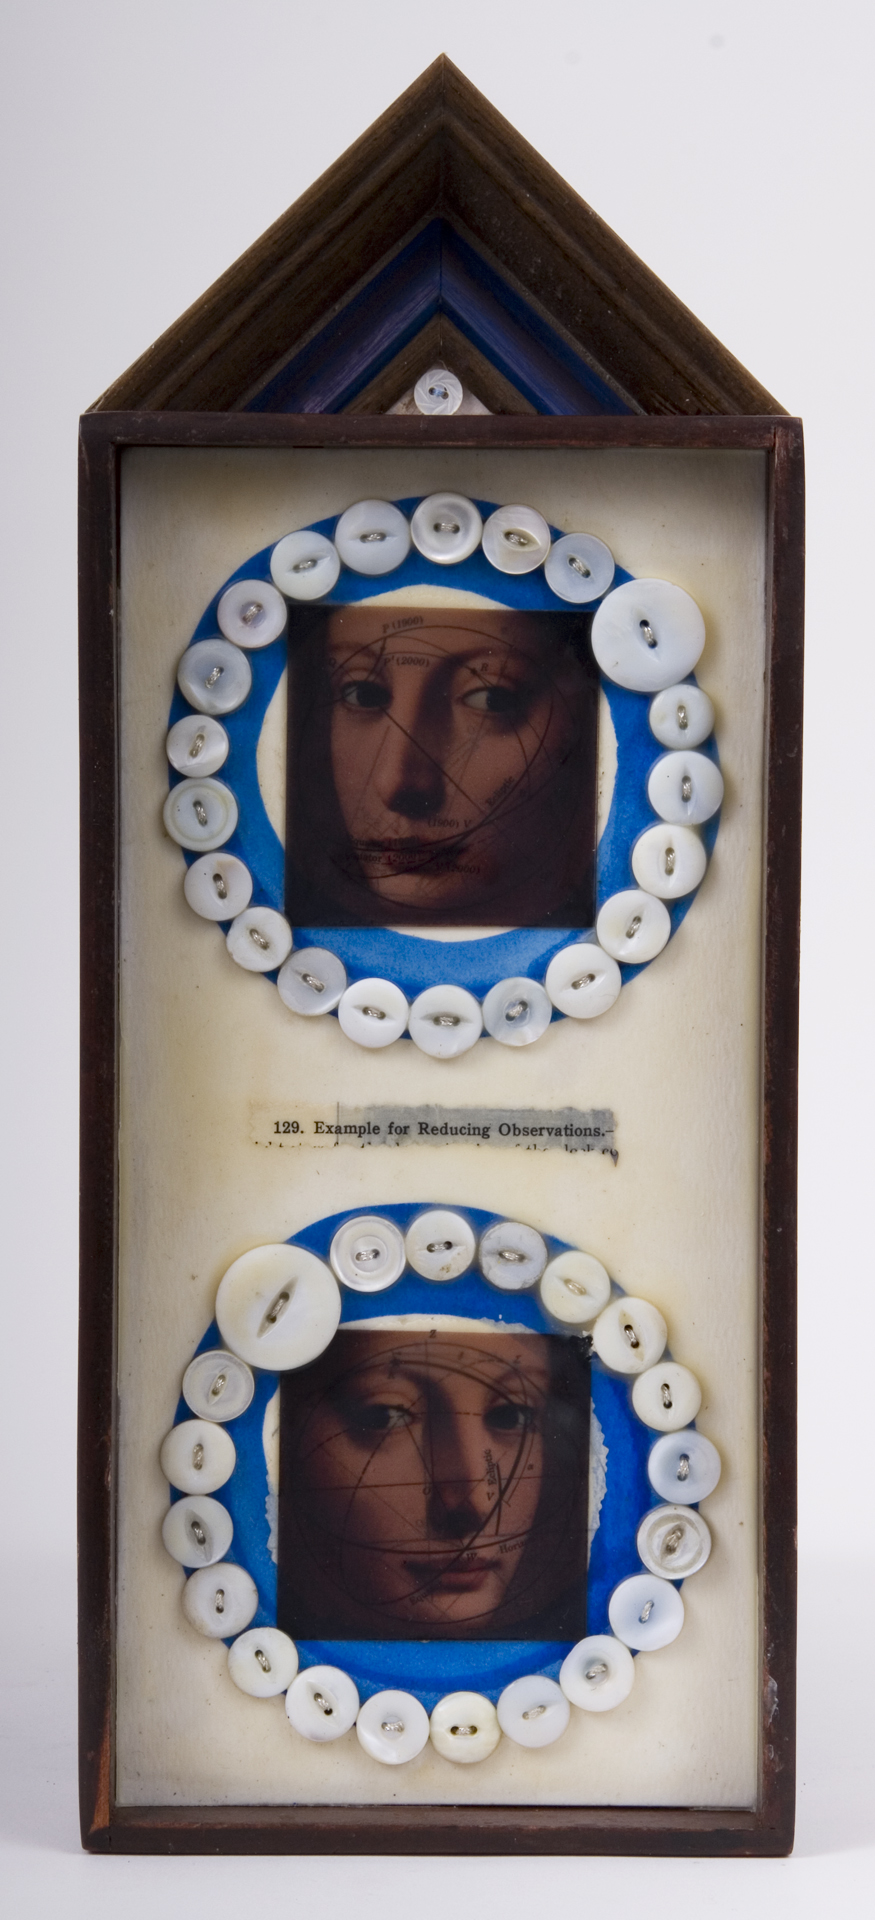 \"129. Example for Reducing Observations\"
mixed-media assemblage
14.25 x 5.75 x 2.5
2009
$95.00
Wood box, frame sample, birch bark, mother of pearl buttons, transparencies, ink, wax, astronomy text on watercolor paper